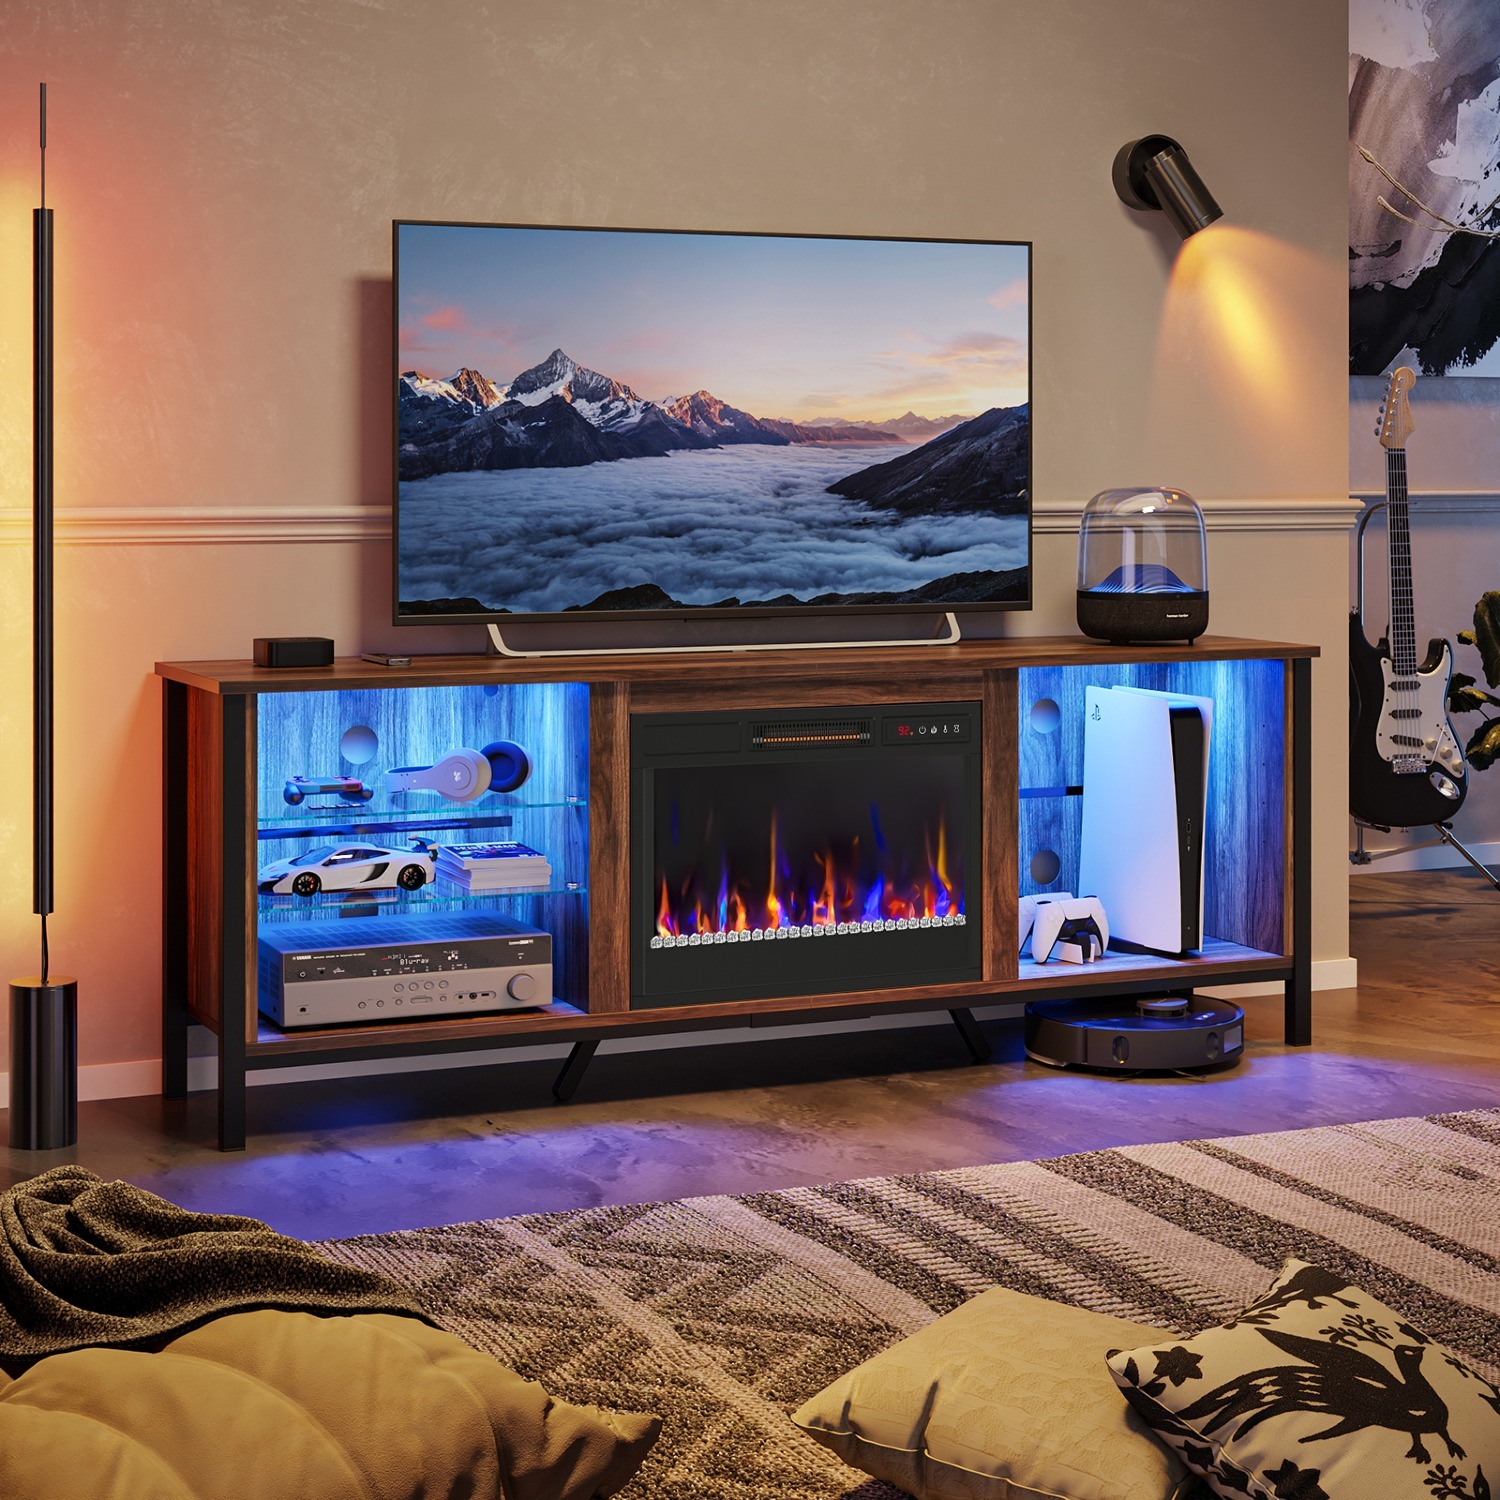 Bestier Modern Electric Fireplace TV Stand (Up to 80" TV) w/ RGB LED Under Cabinet Lights $198 + Free Shipping